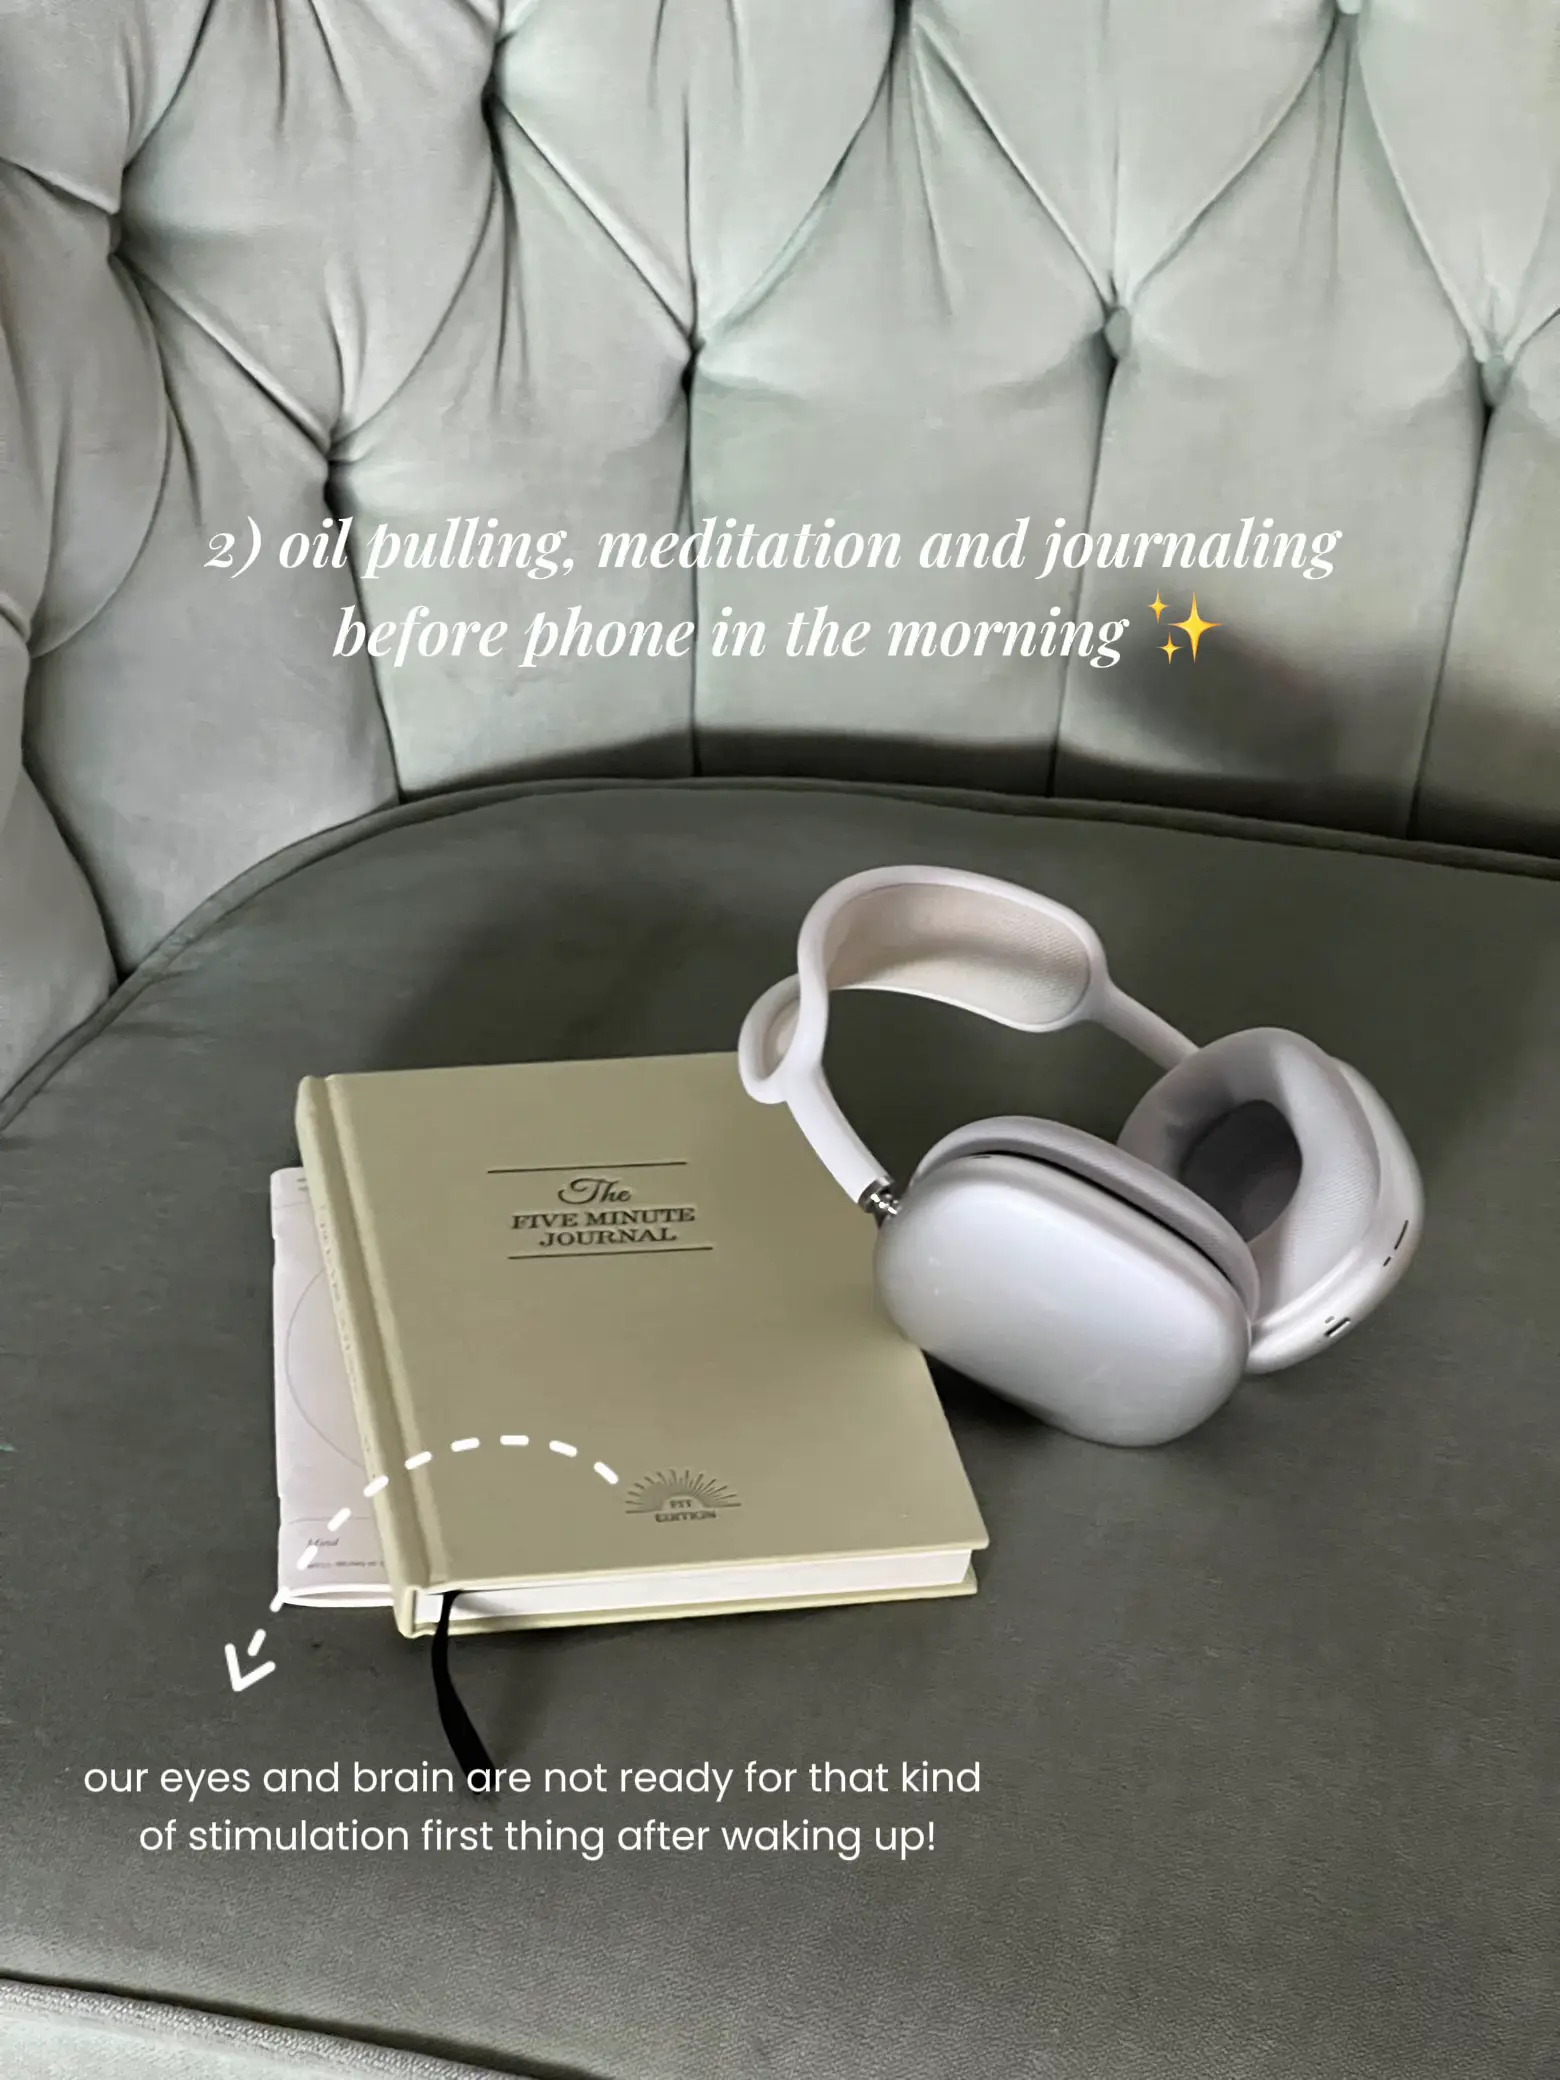  A book and headphones are on a couch.